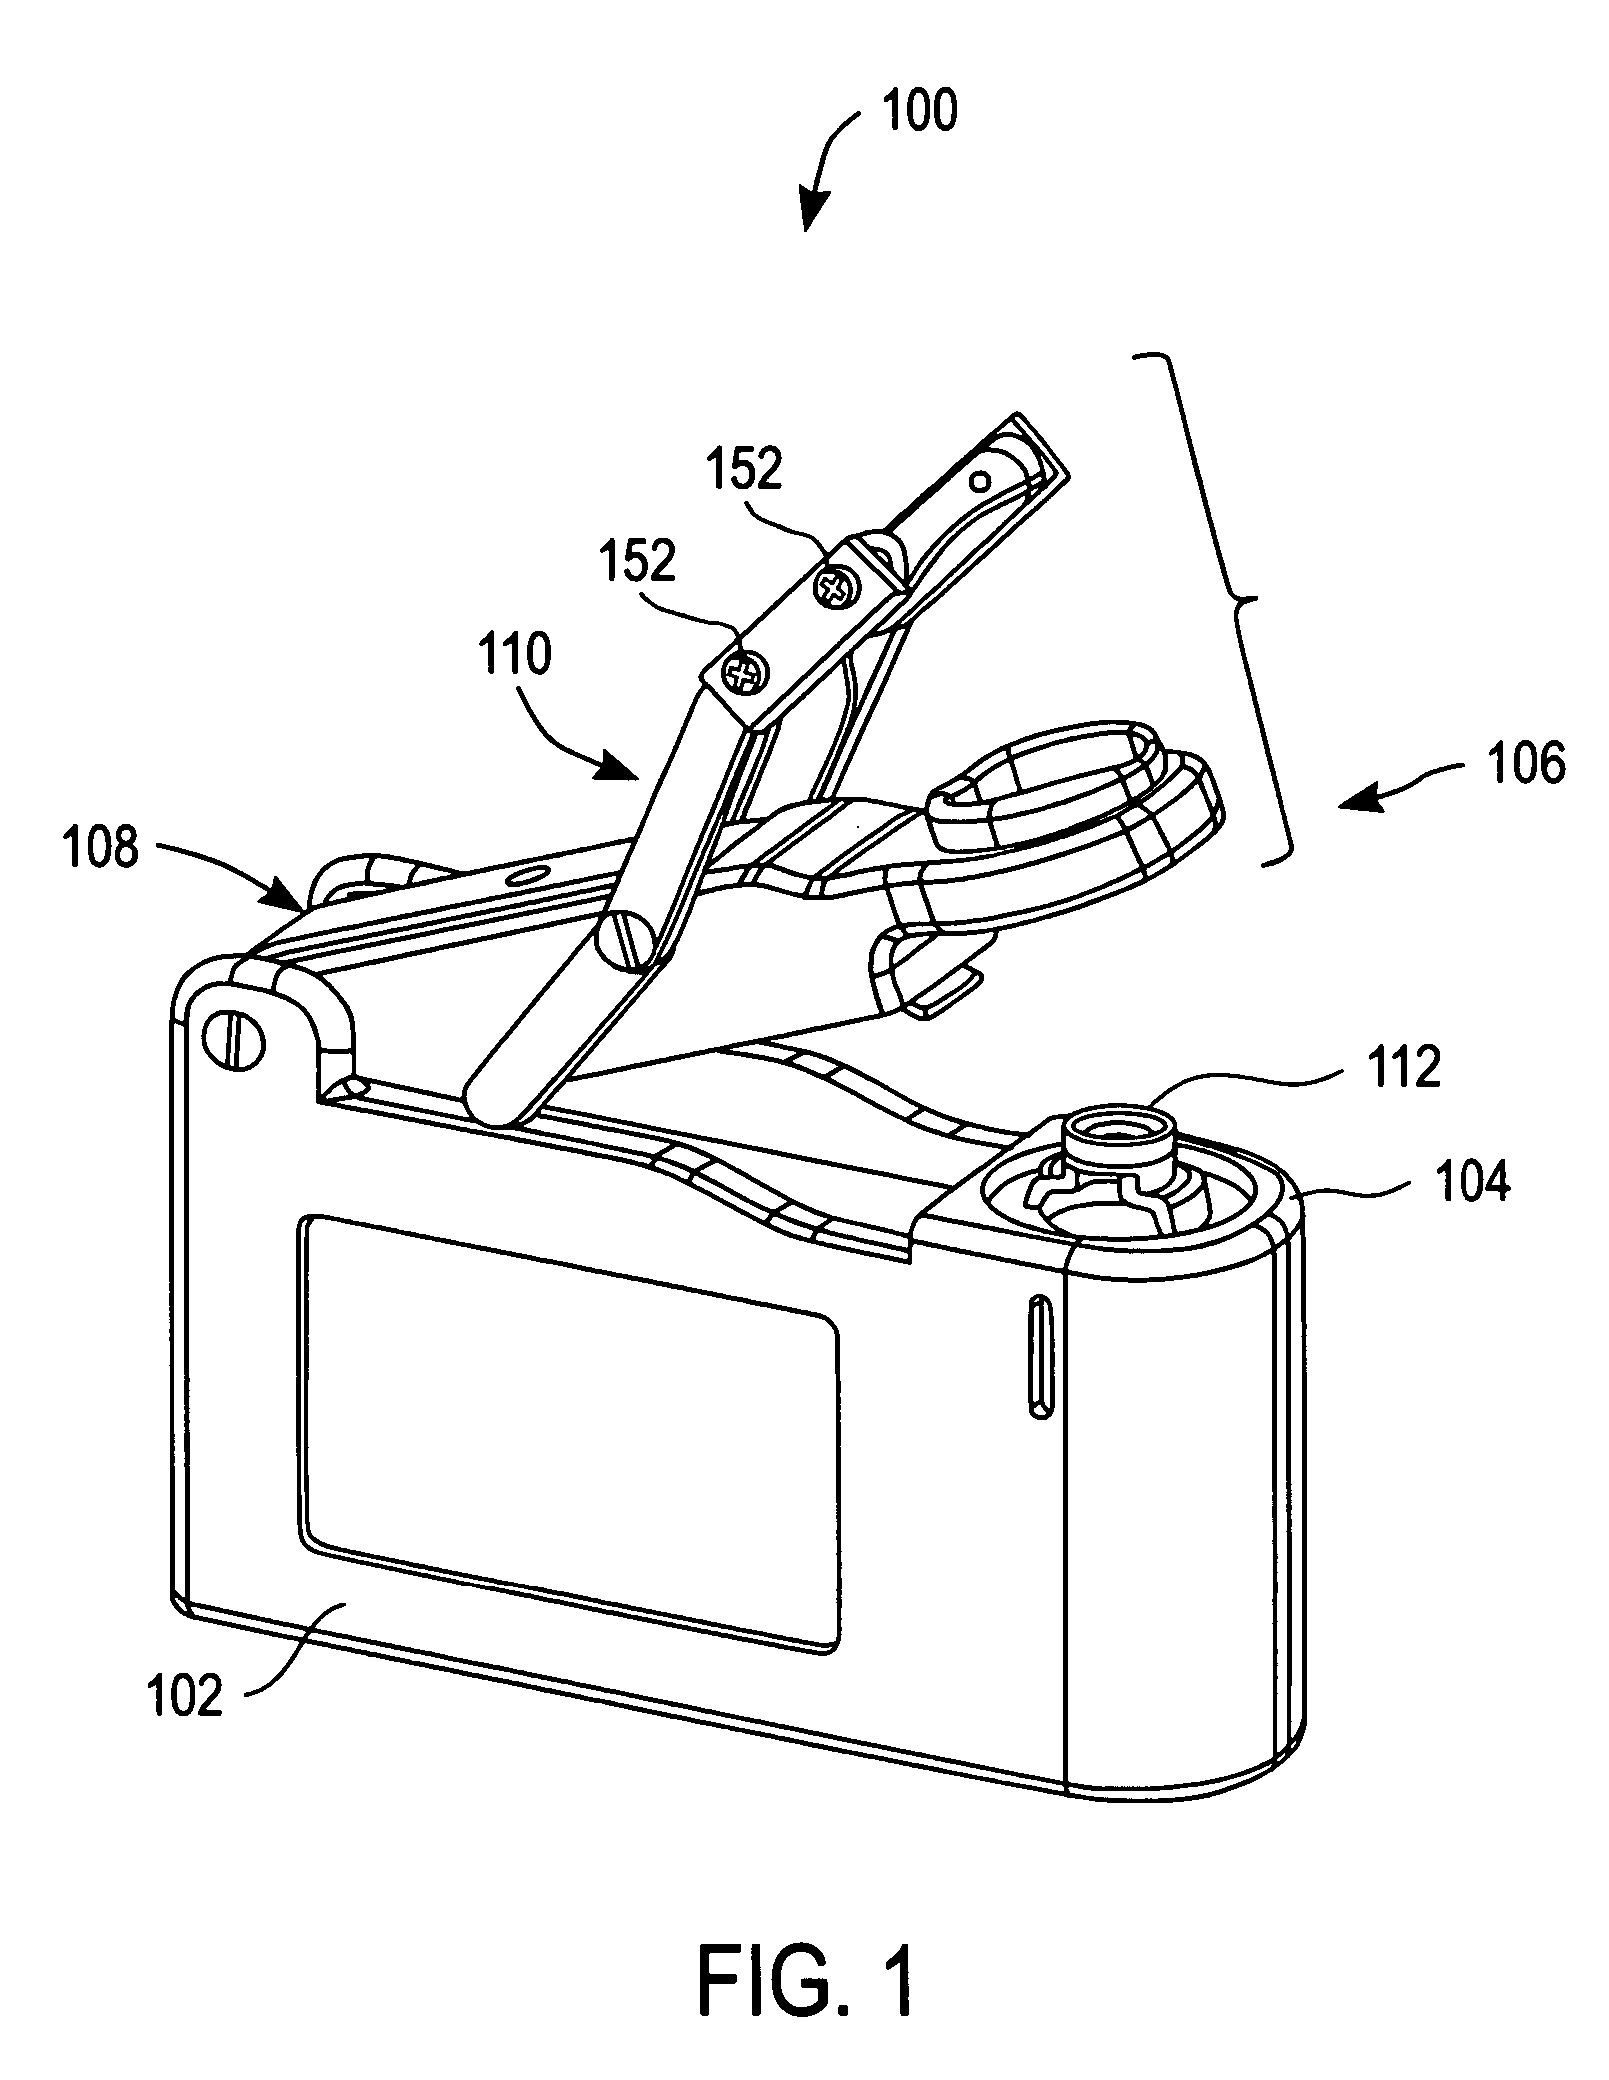 Apparatus for extracting bodily fluid